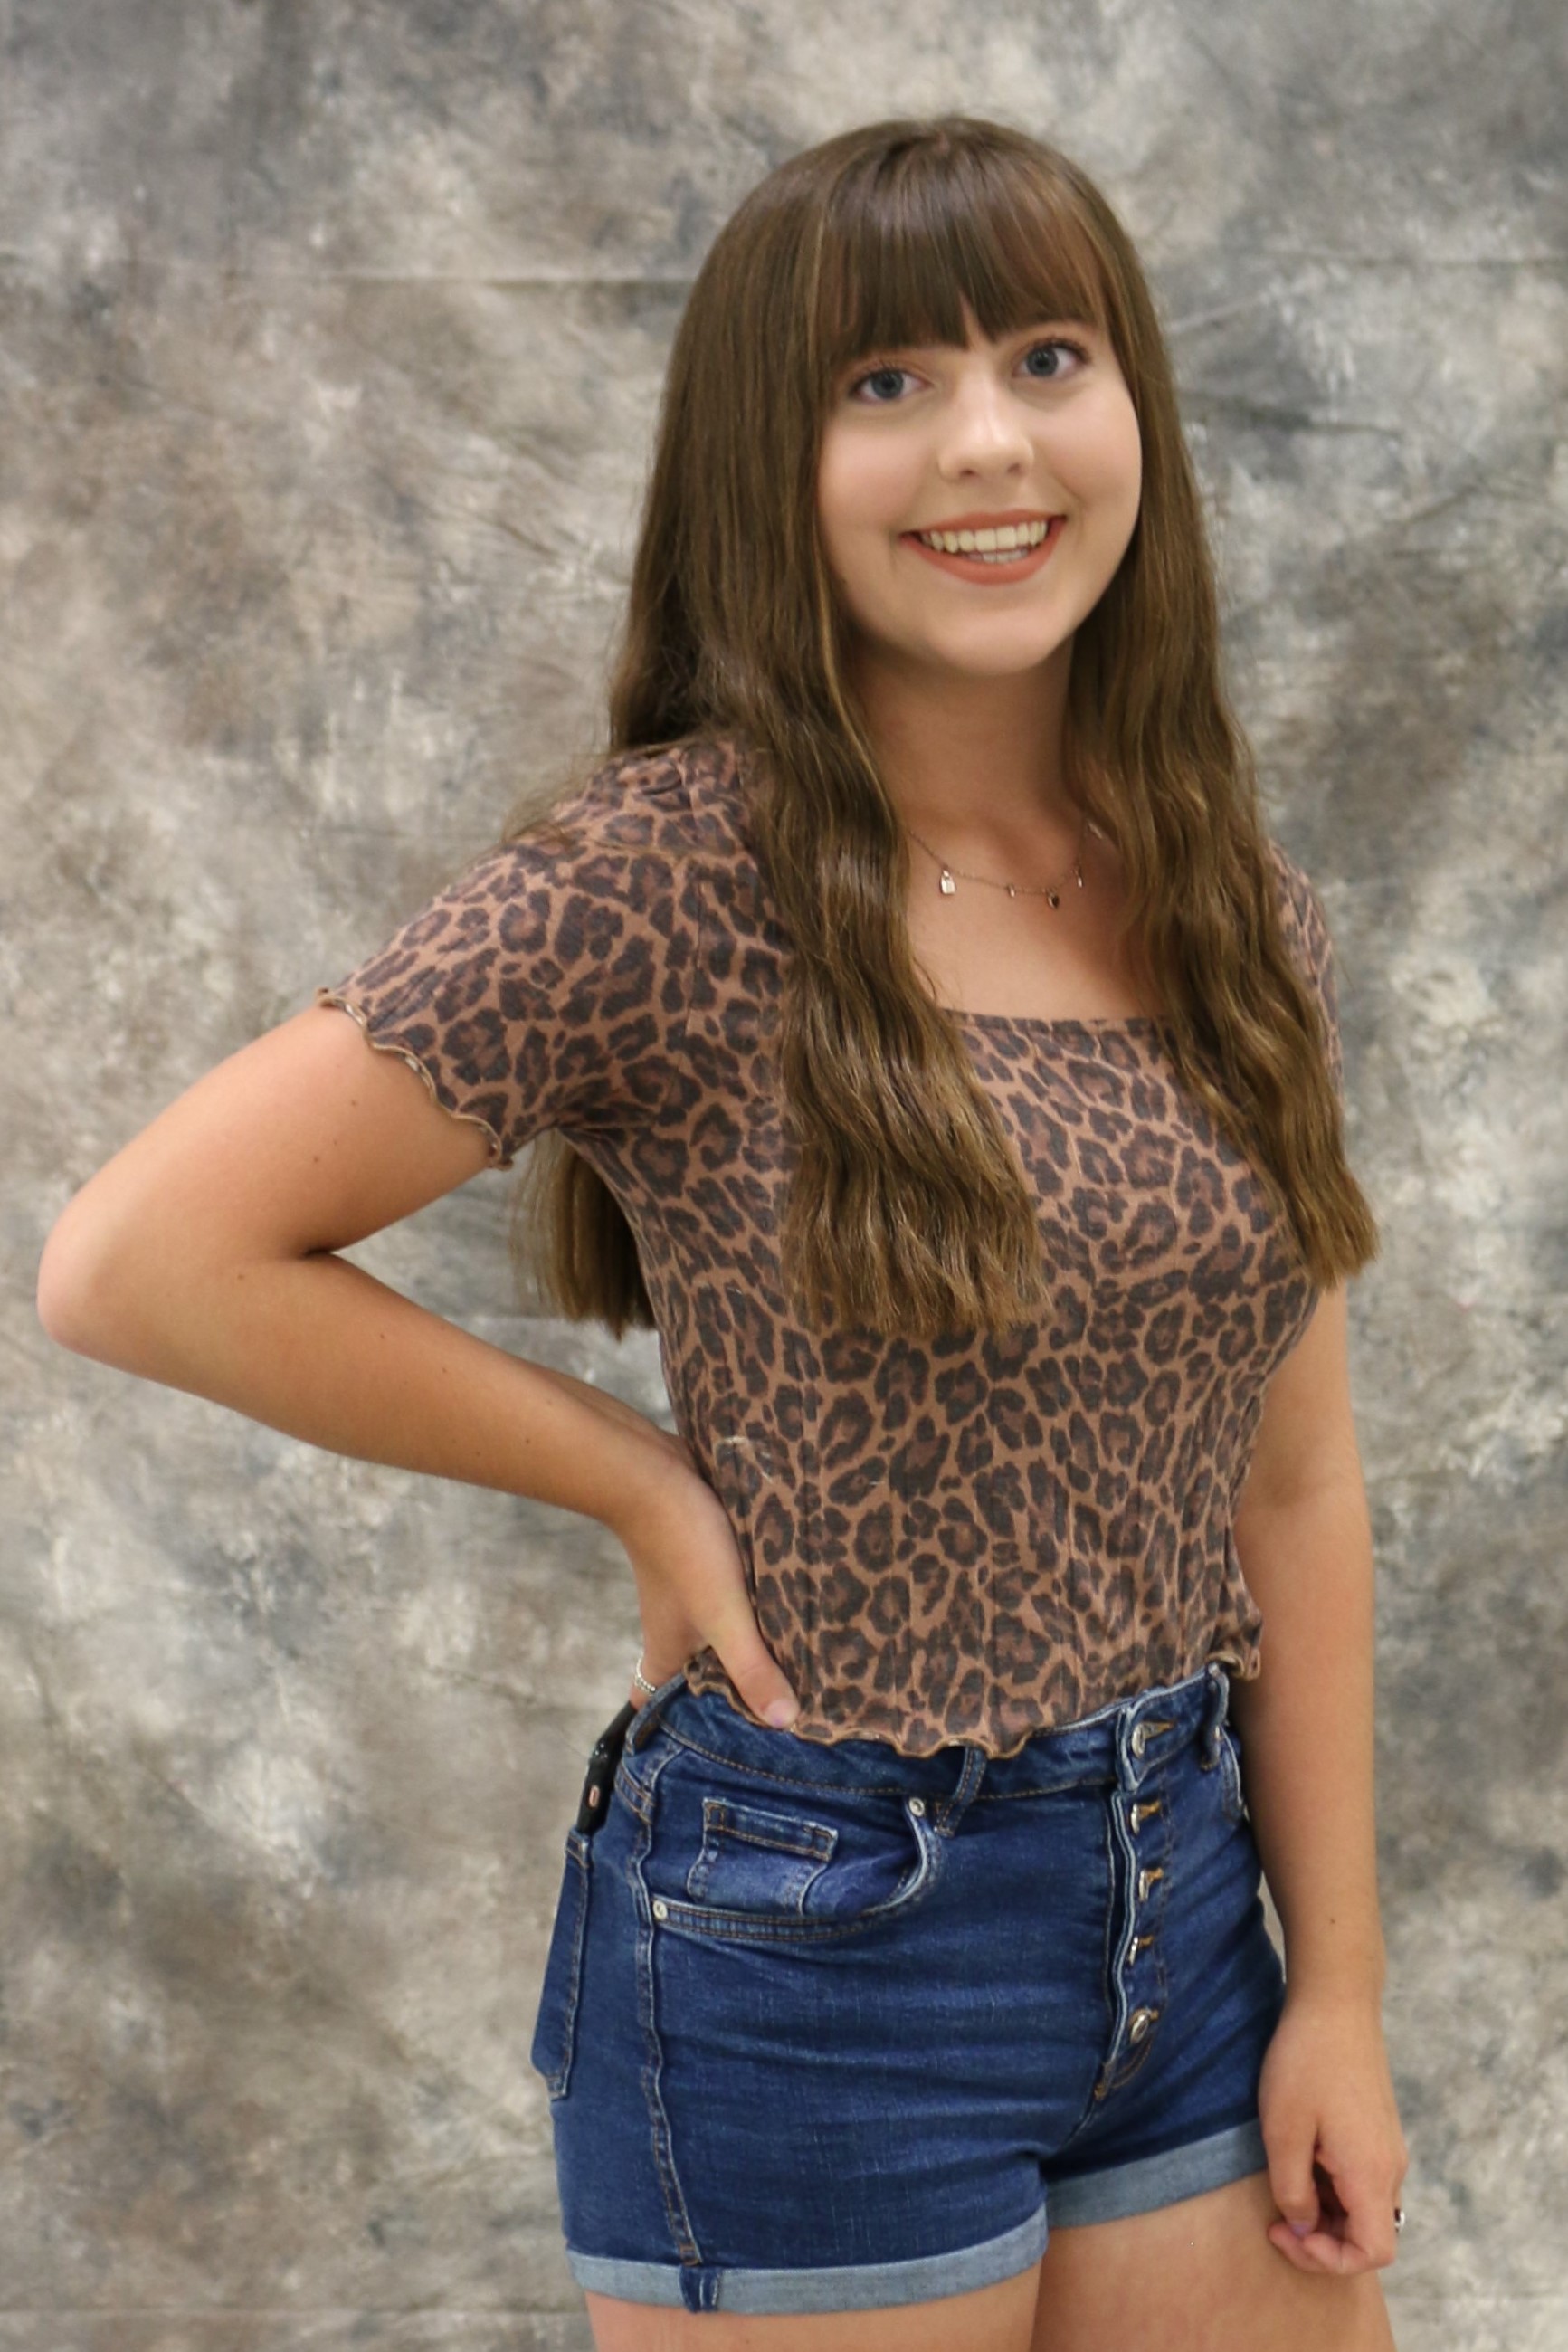 Queen Contestant - Madyson Satterfield 16